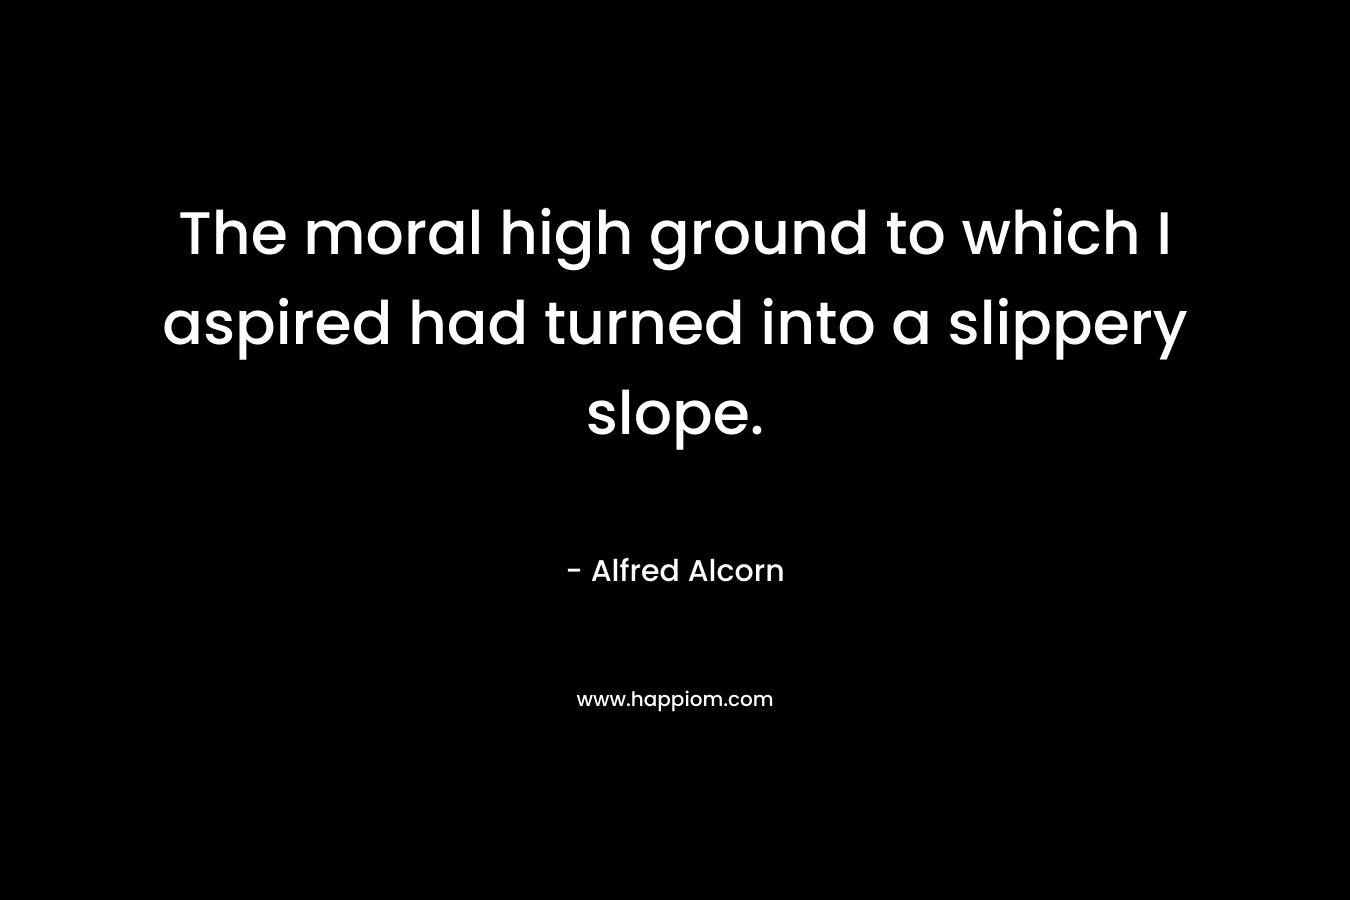 The moral high ground to which I aspired had turned into a slippery slope. – Alfred Alcorn